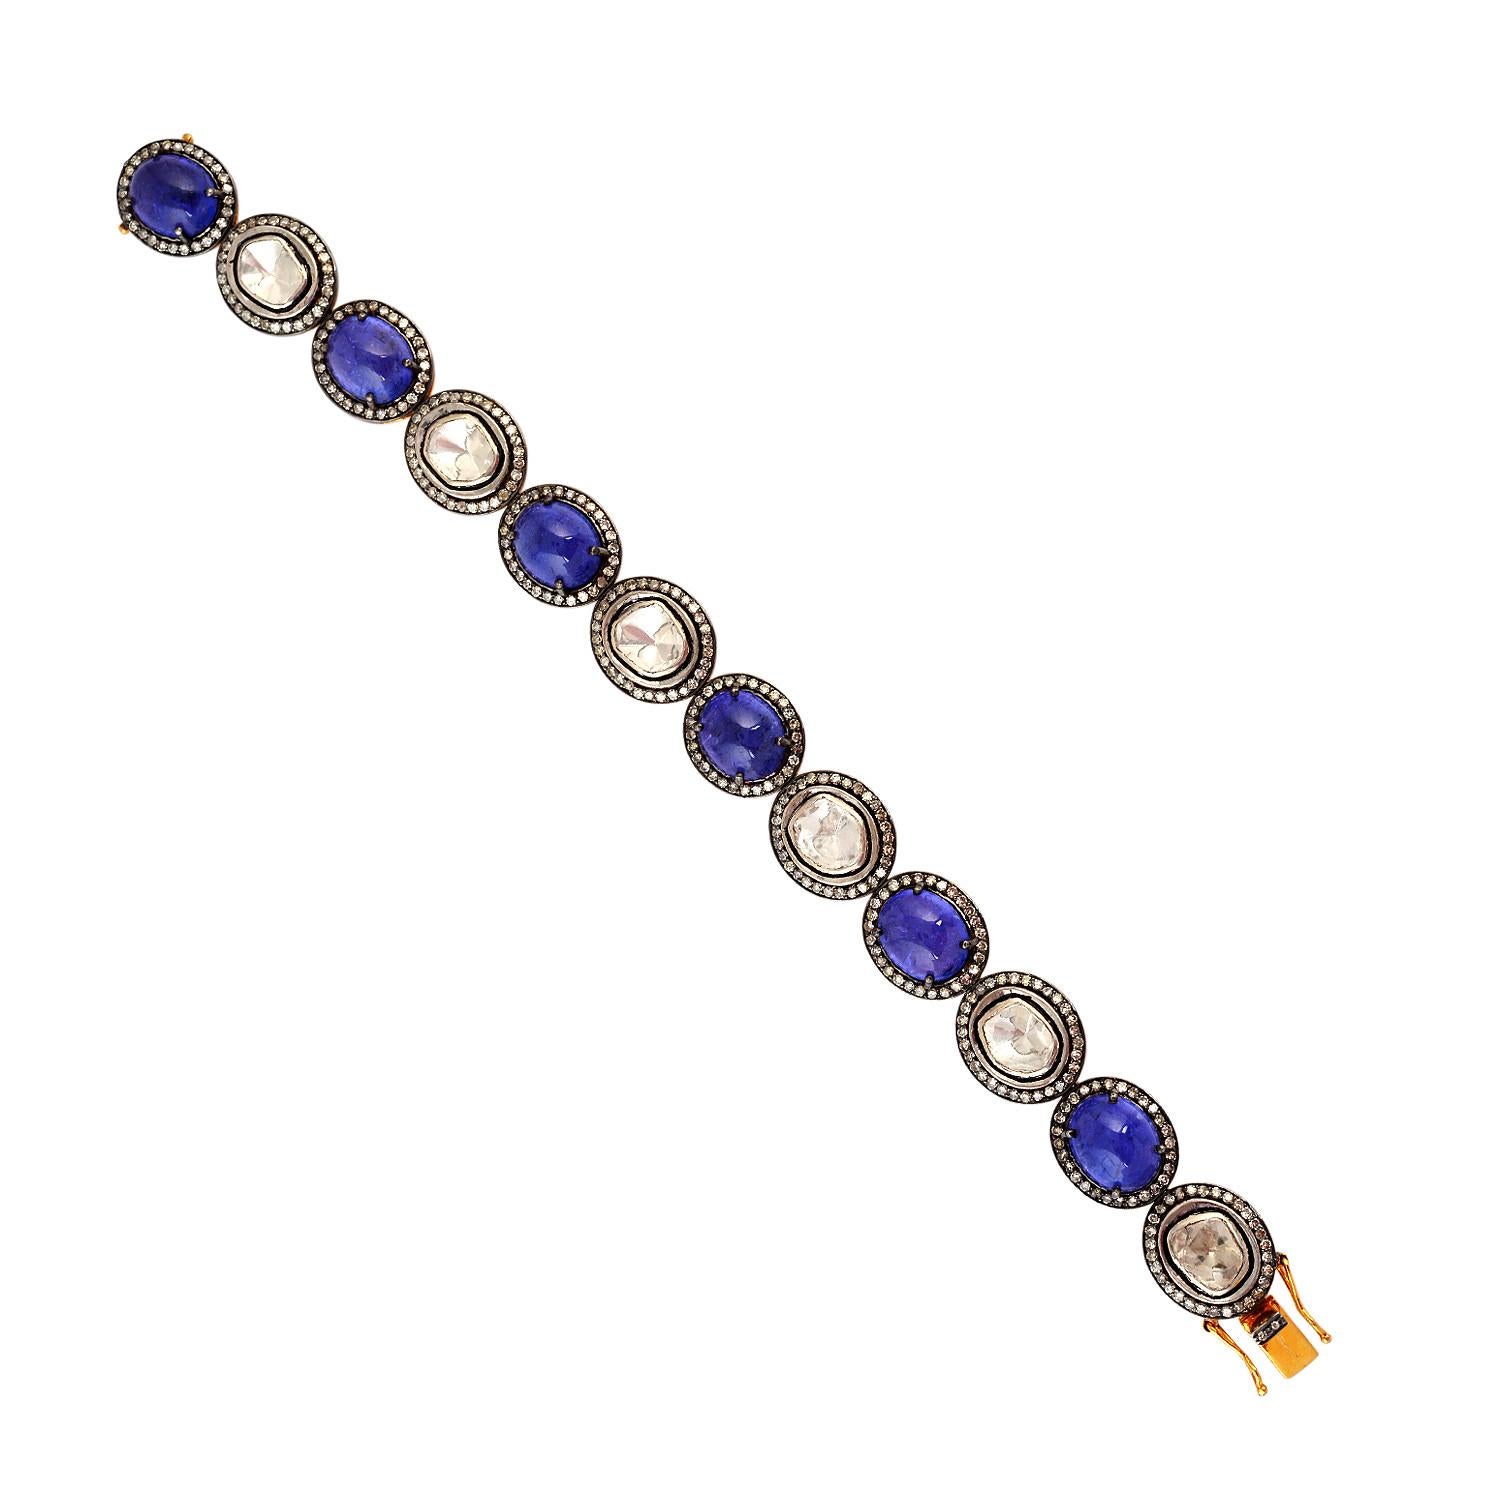 A stunning statement bracelet handmade in 14K gold and sterling silver. It is set in 29.0 carats tanzanite and 5.0 carats of uncut & rosecut diamonds in blackened finish. A true masterpiece.  Clasp Closure

FOLLOW  MEGHNA JEWELS storefront to view